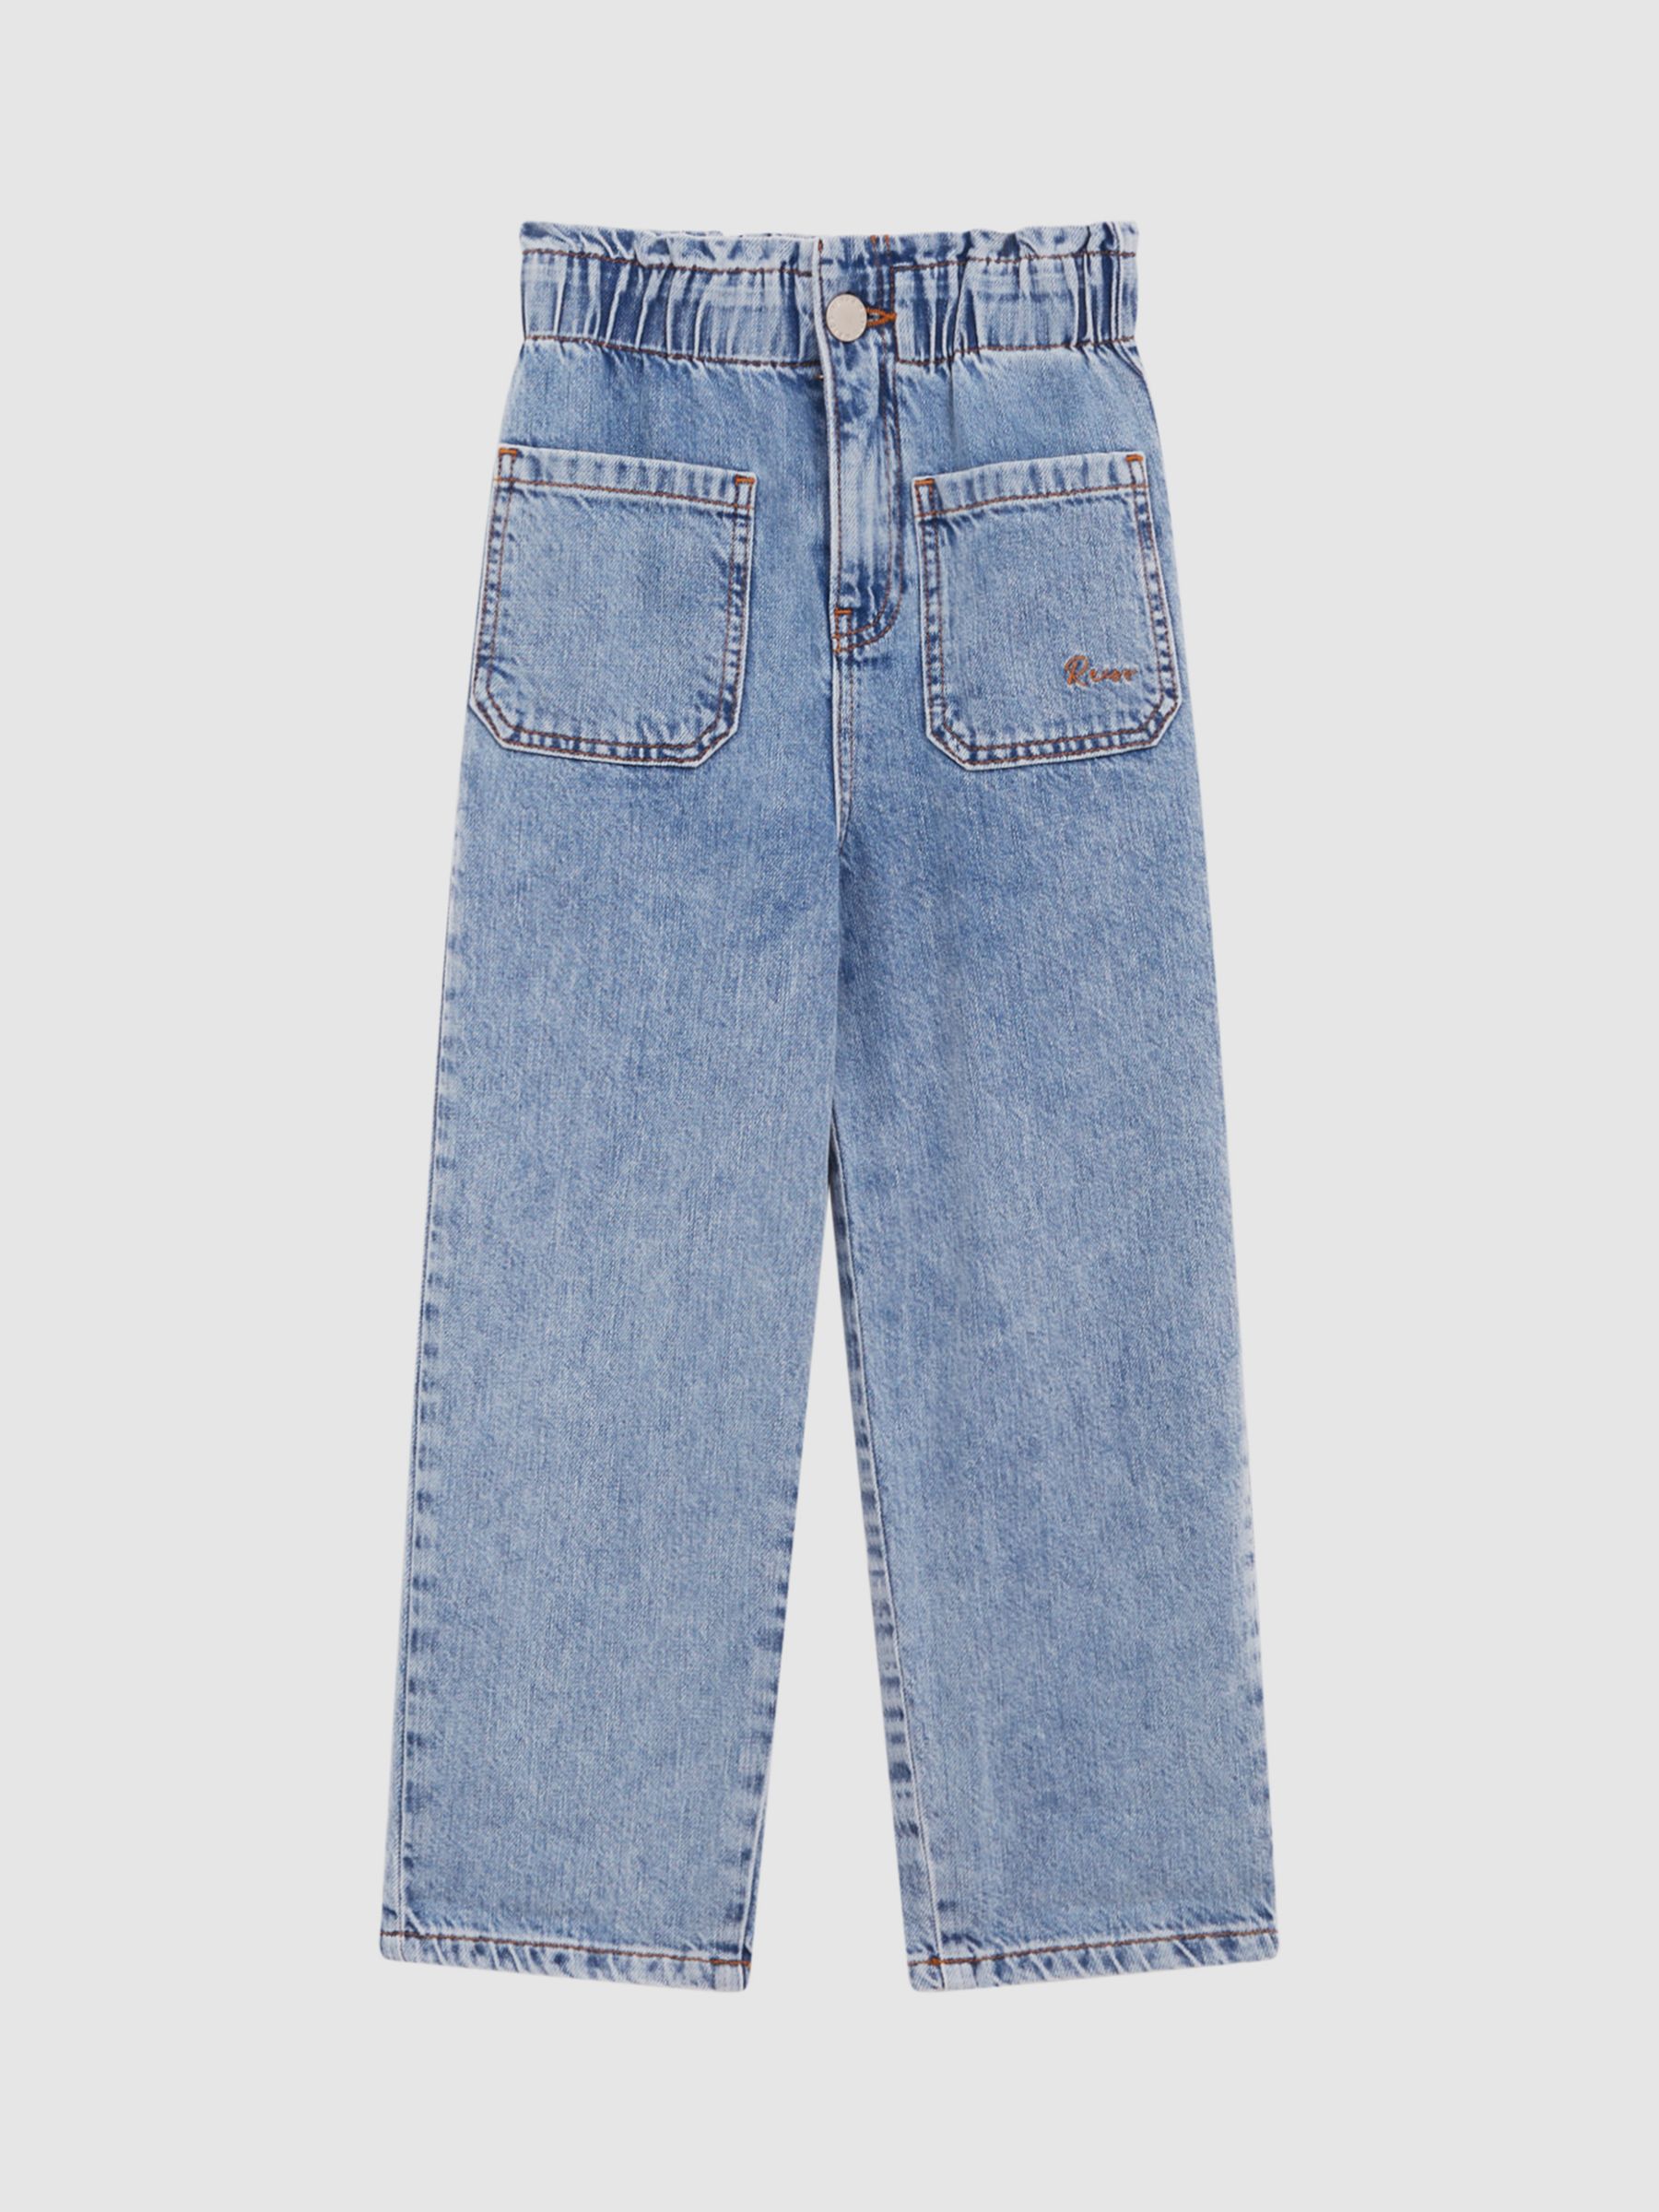 Buy Reiss Kids' Elodie Washed High Waist Jeans, Blue Online at johnlewis.com